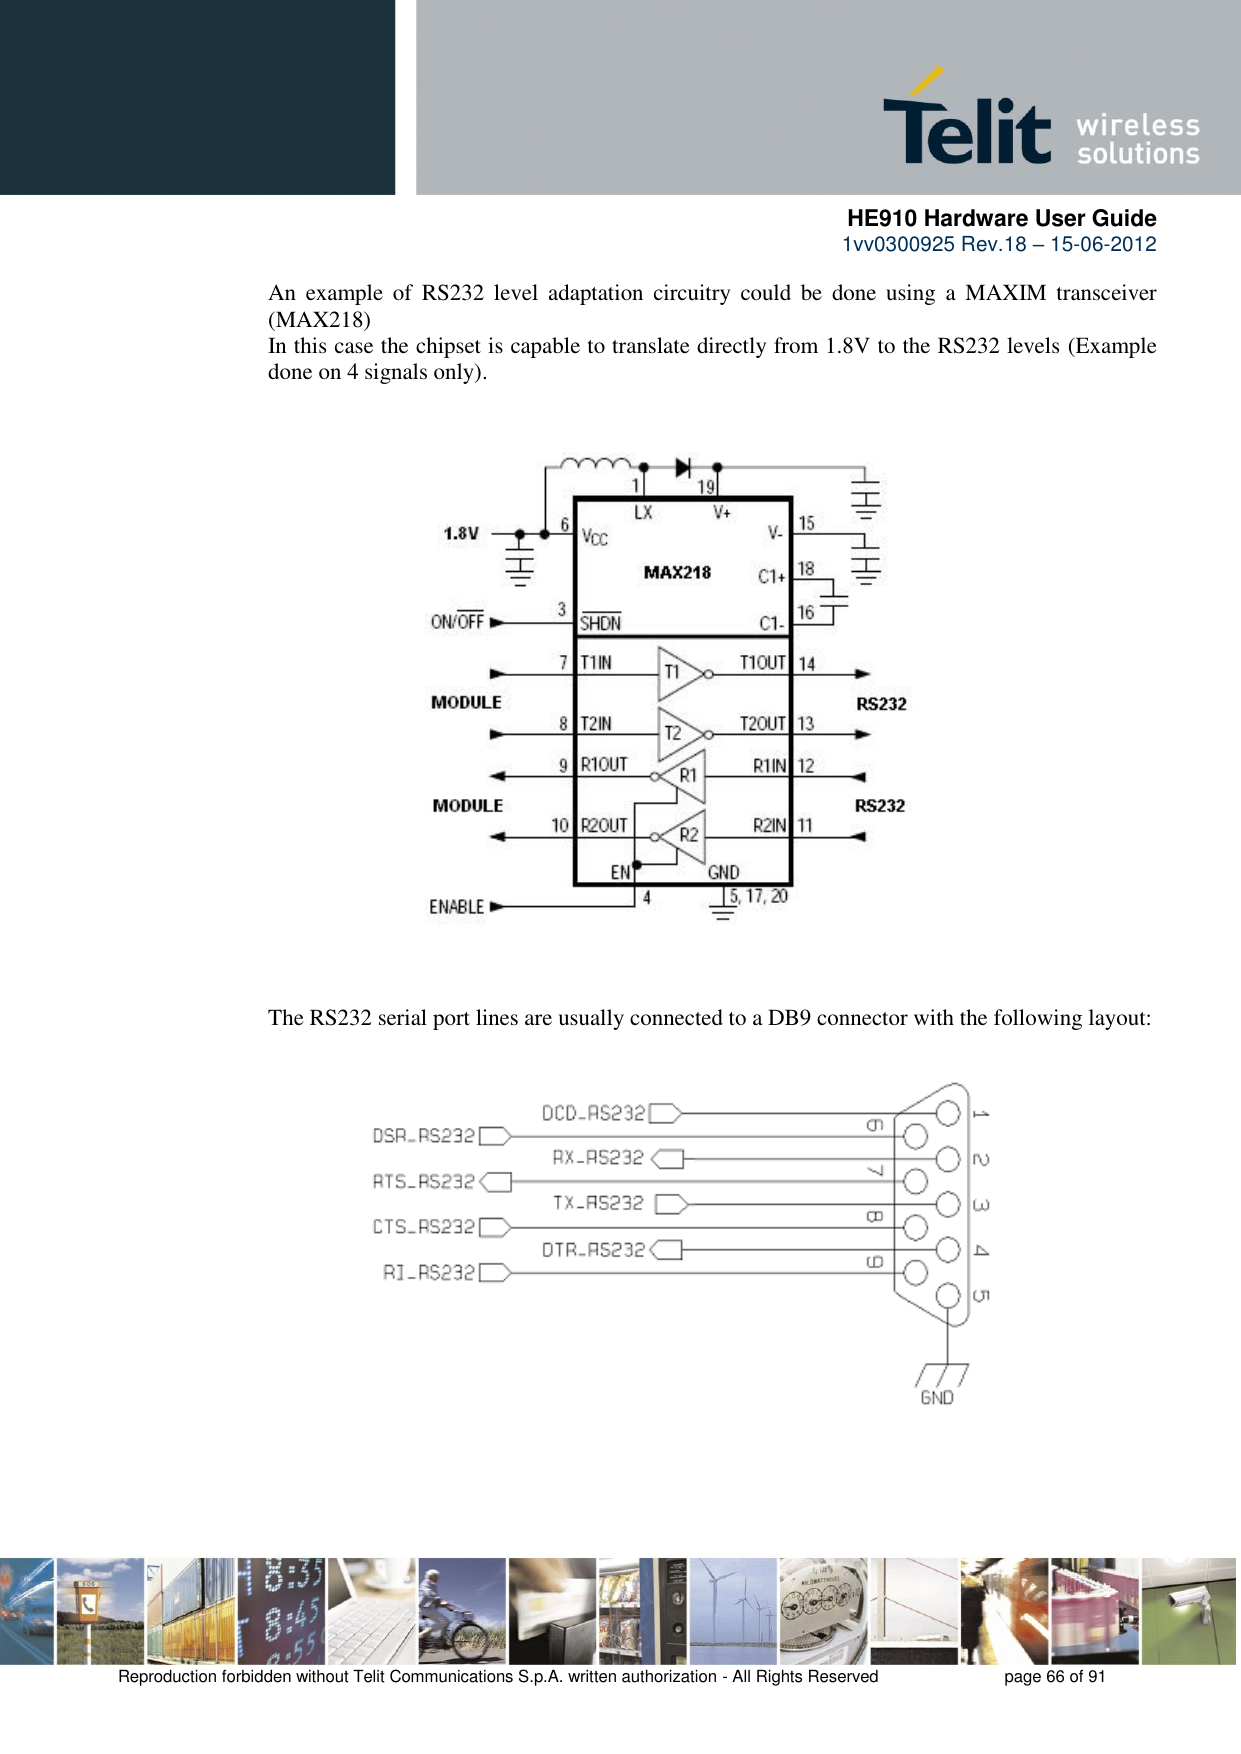      HE910 Hardware User Guide 1vv0300925 Rev.18 – 15-06-2012    Reproduction forbidden without Telit Communications S.p.A. written authorization - All Rights Reserved    page 66 of 91  An  example  of  RS232  level  adaptation  circuitry  could  be  done  using  a  MAXIM  transceiver (MAX218)  In this case the chipset is capable to translate directly from 1.8V to the RS232 levels (Example done on 4 signals only). The RS232 serial port lines are usually connected to a DB9 connector with the following layout: 